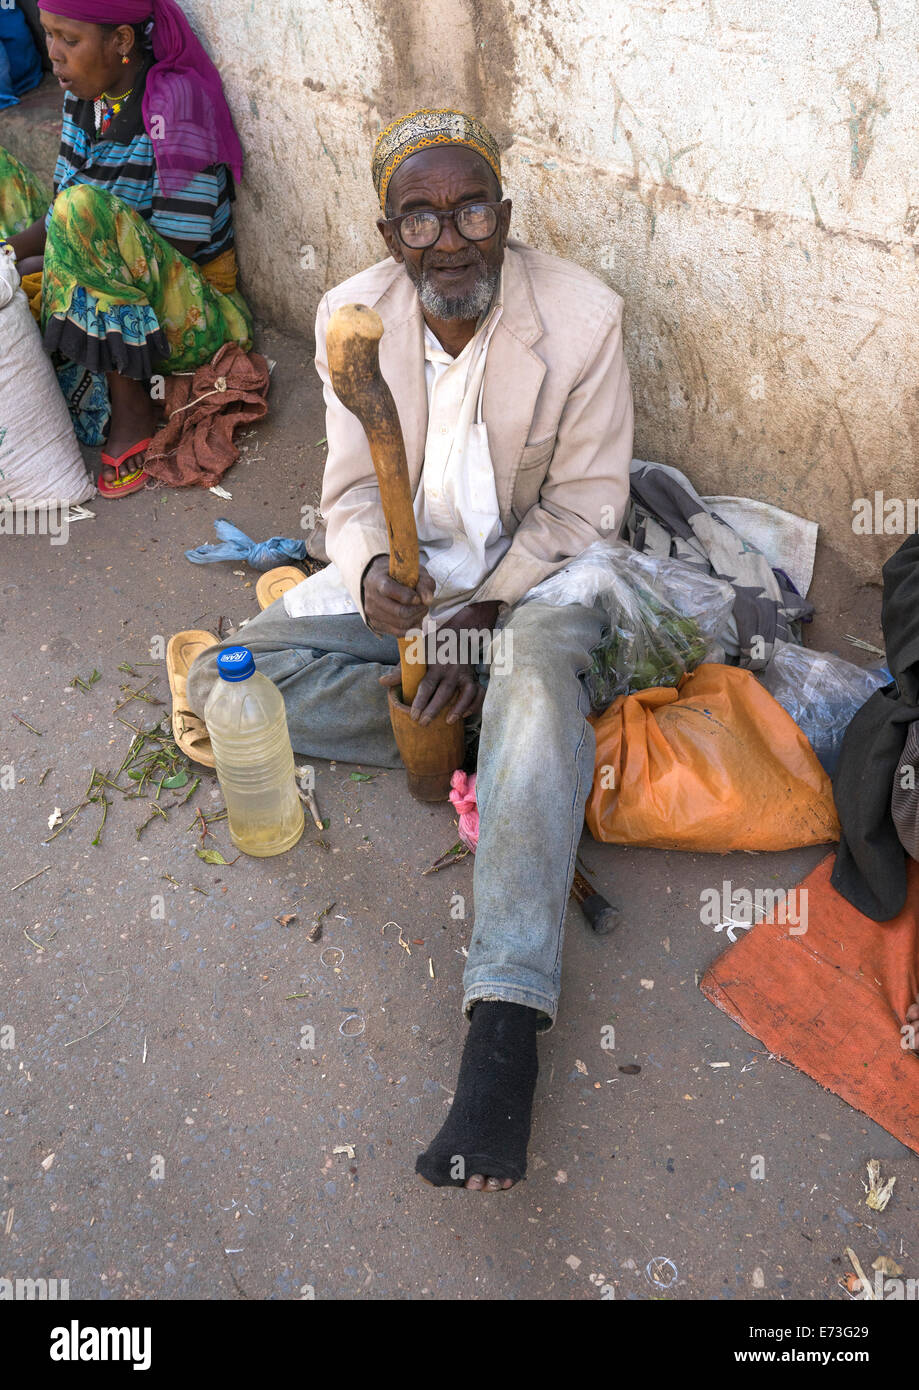 Old Man Without Teeth Crashing Some Qat In The Street, Harar, Ethiopia Stock Photo